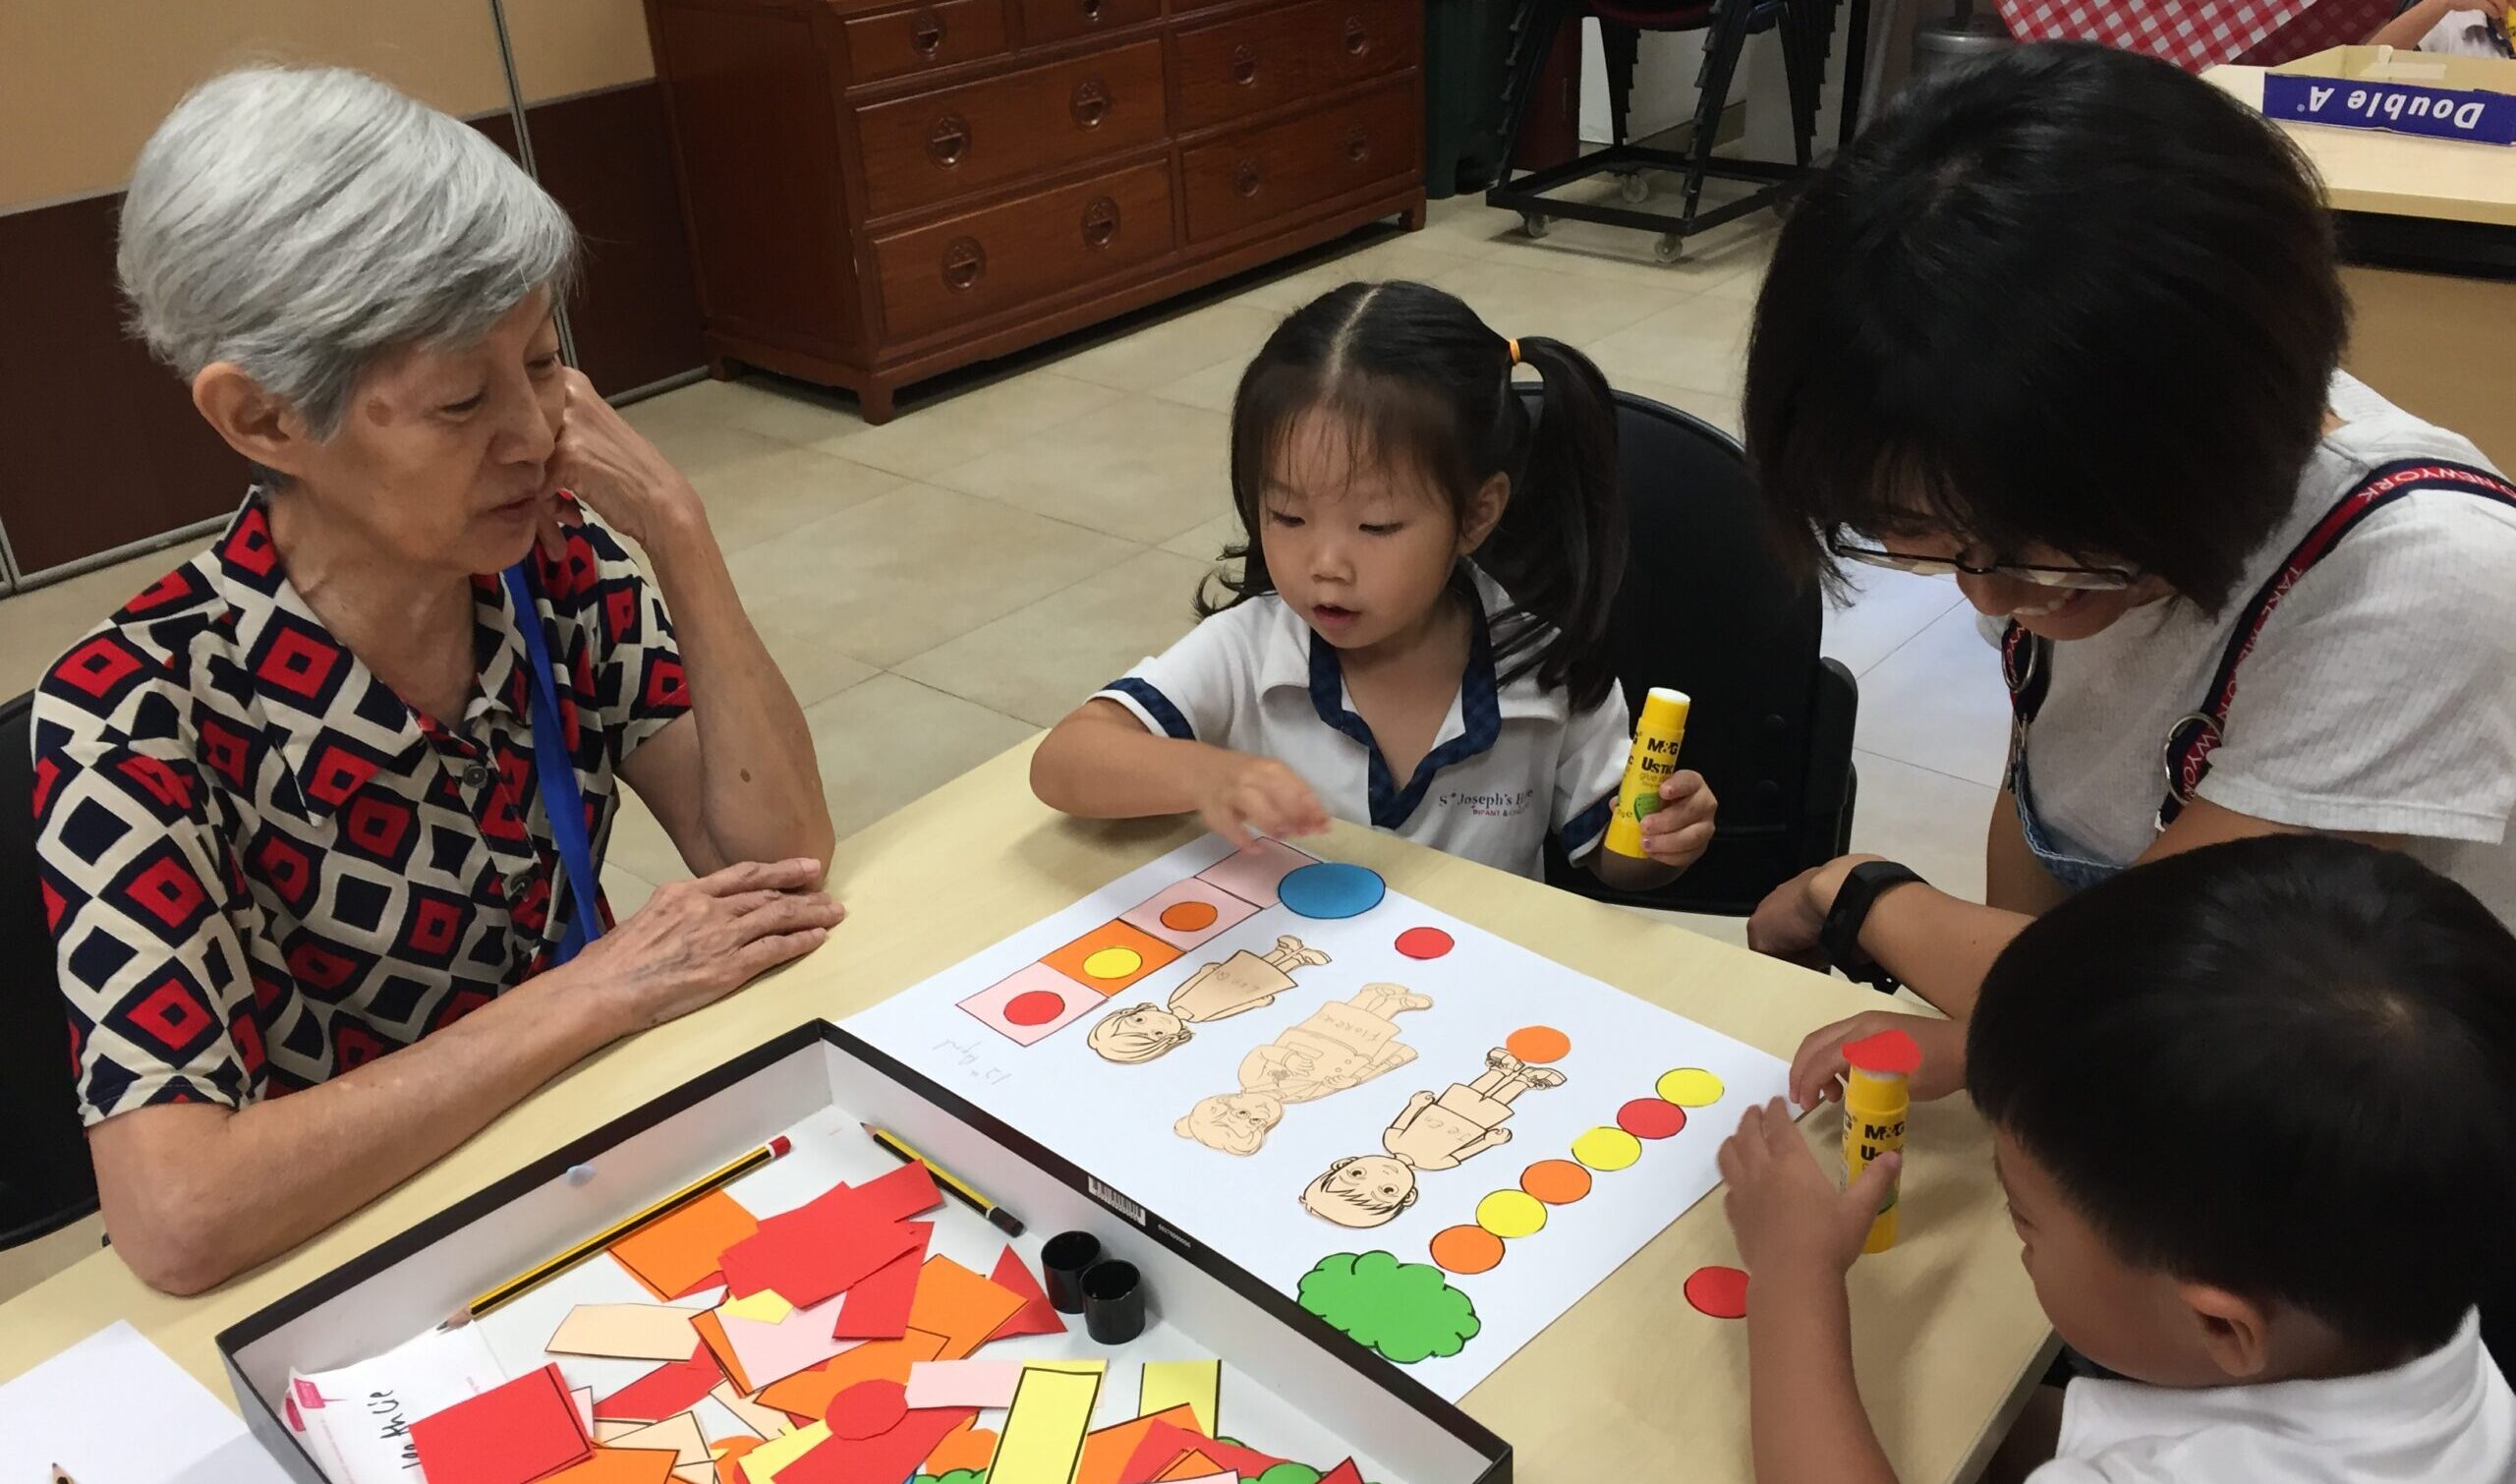 Intergenerational Expressive Arts at Childcare Centre